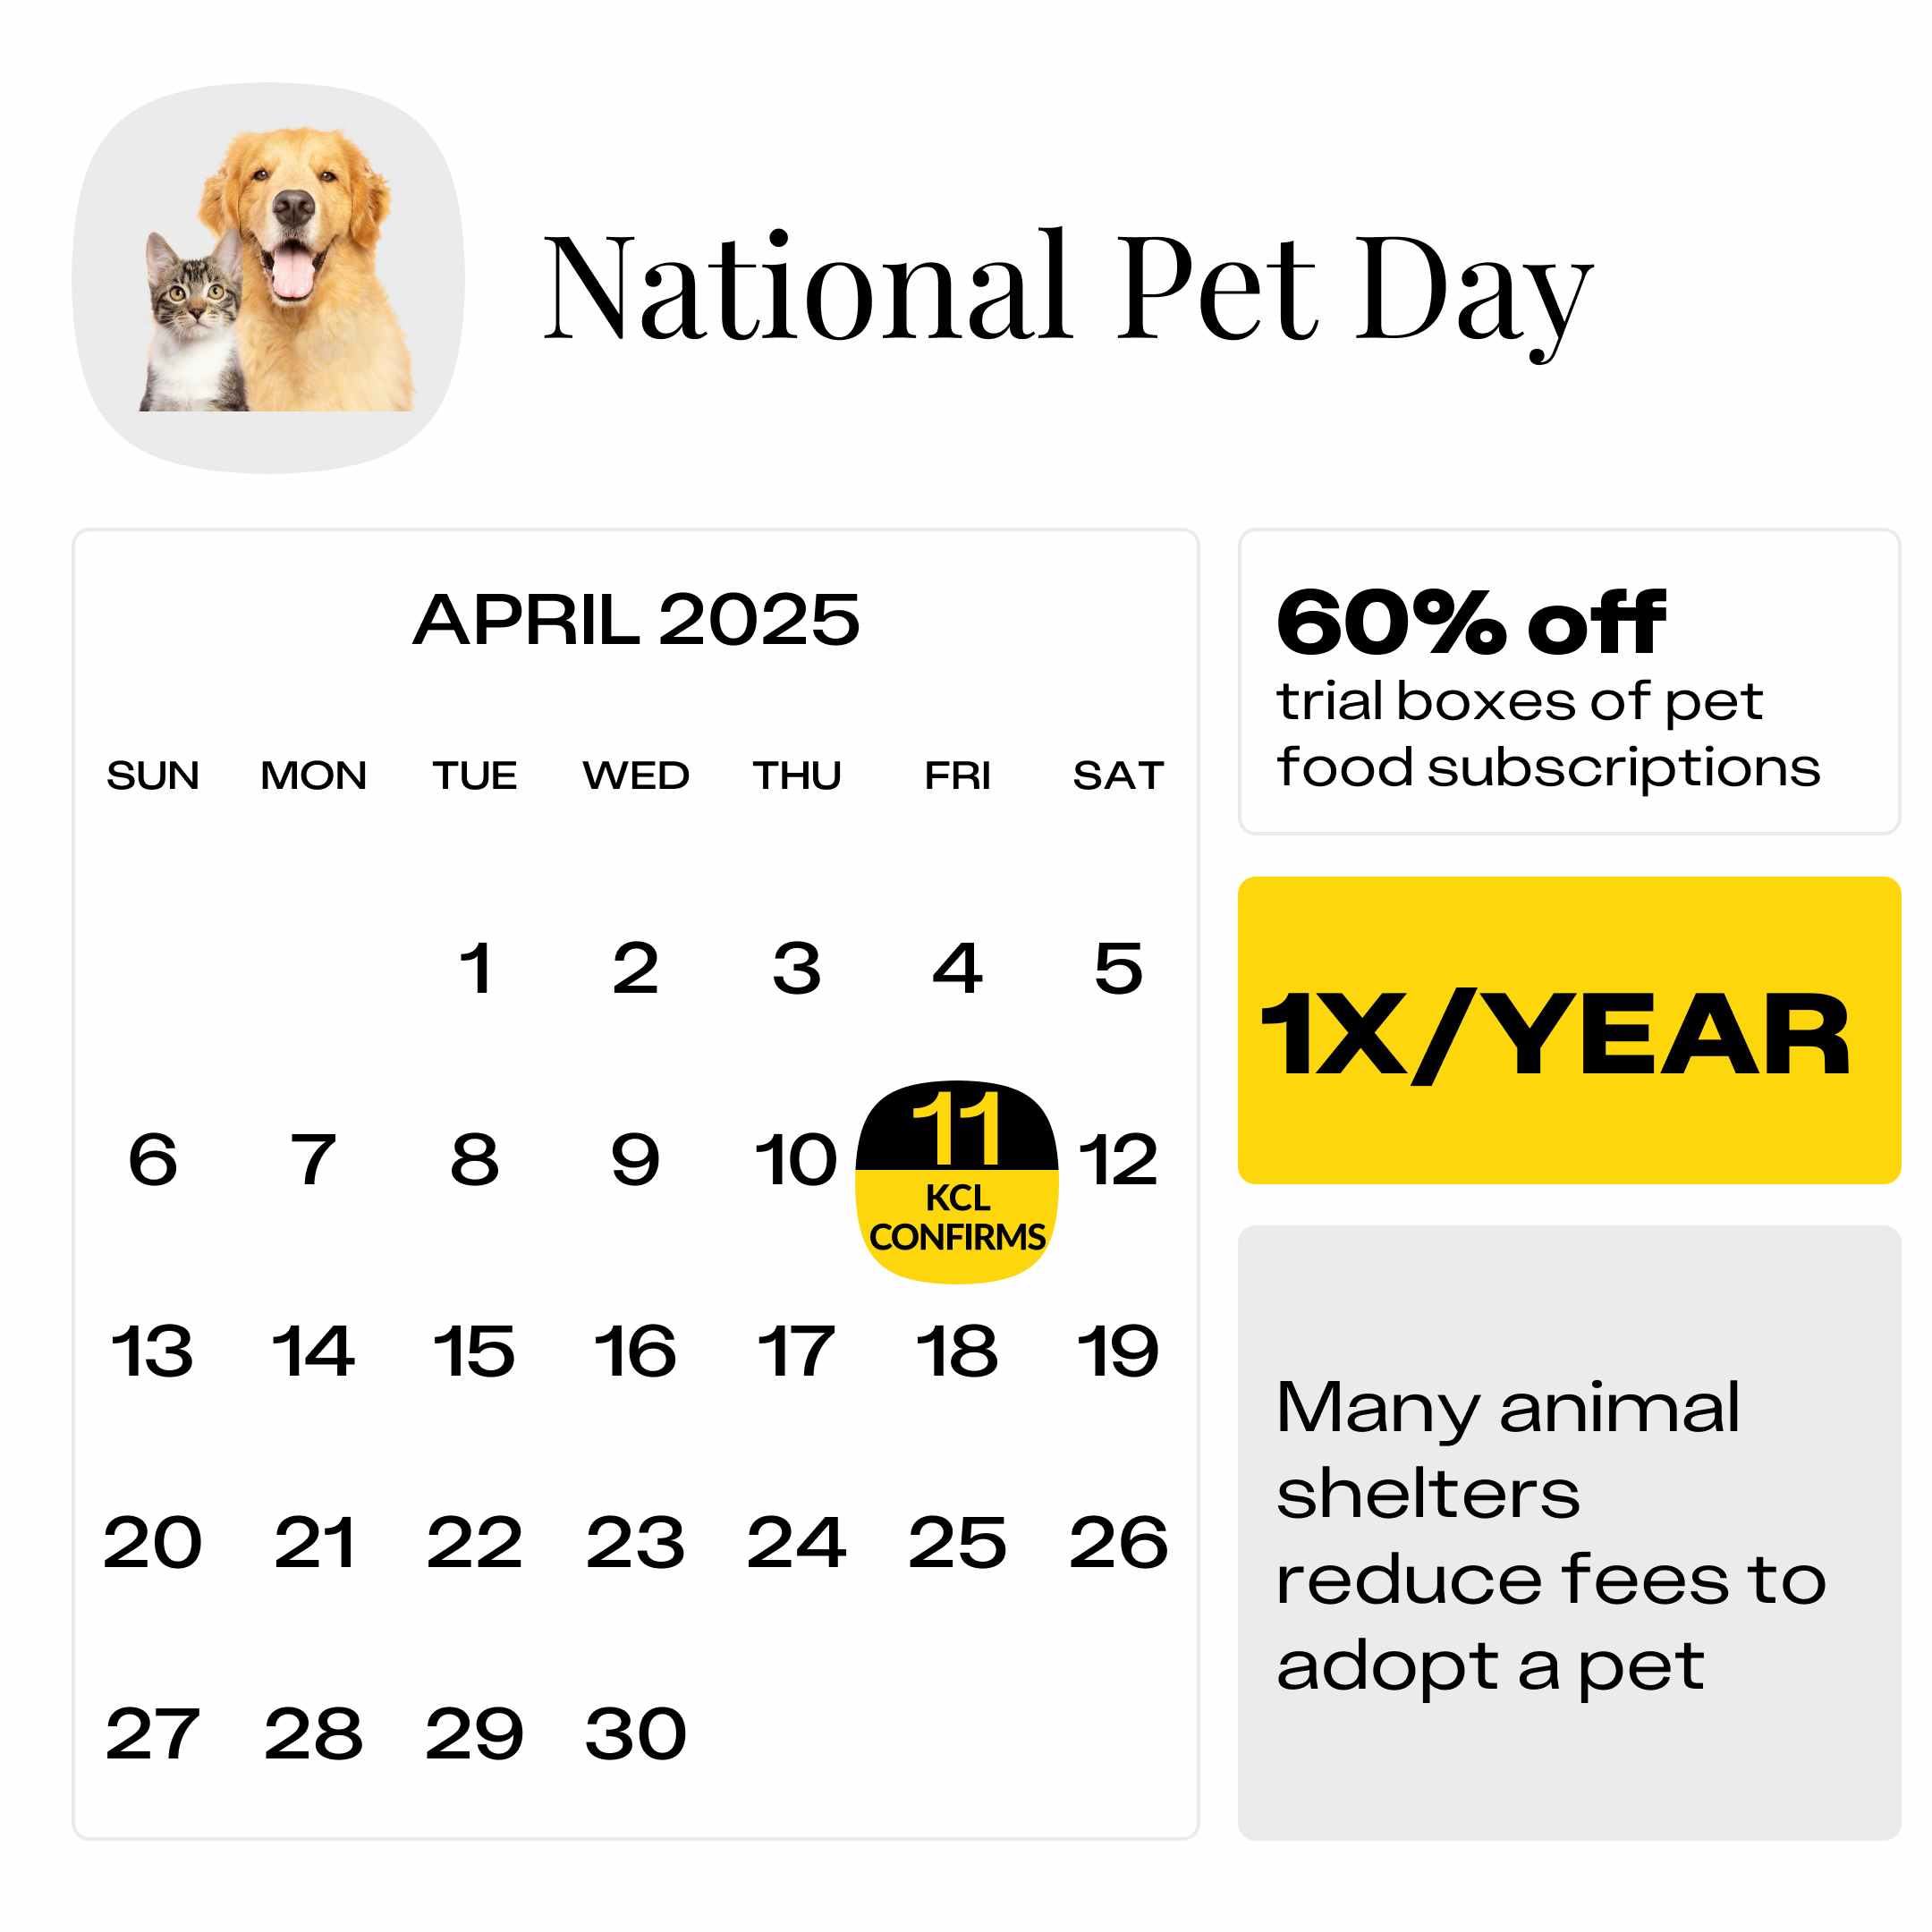 National-Pet-Day-2025-confirmed